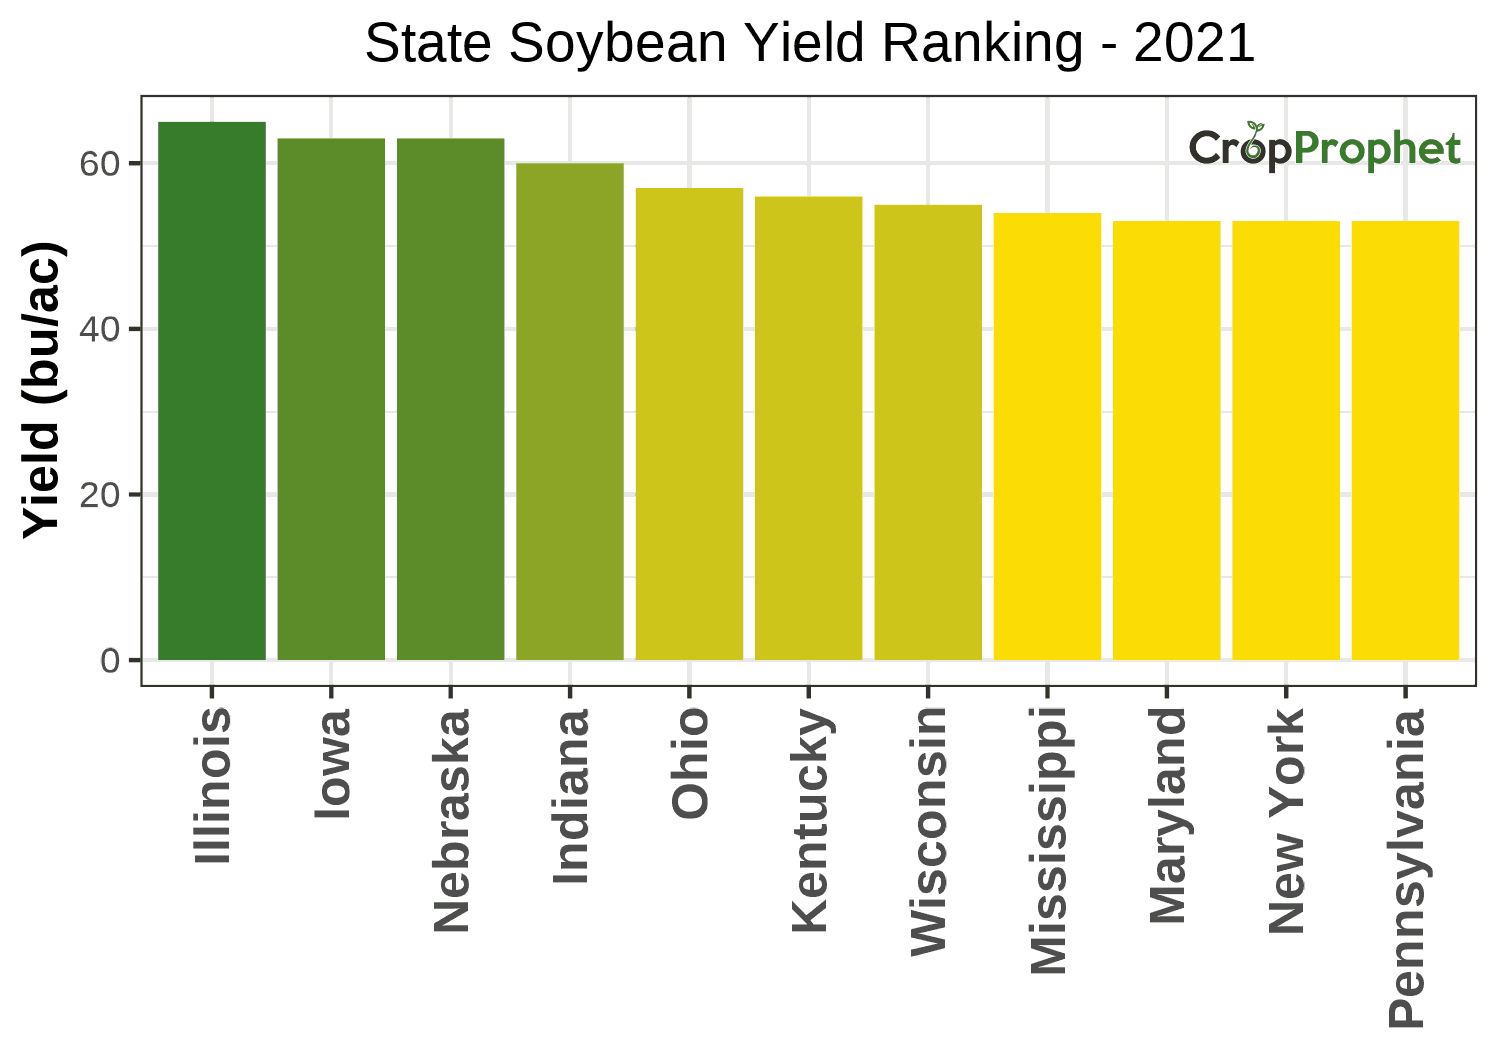 Soybean Production by State - 2021 Rankings